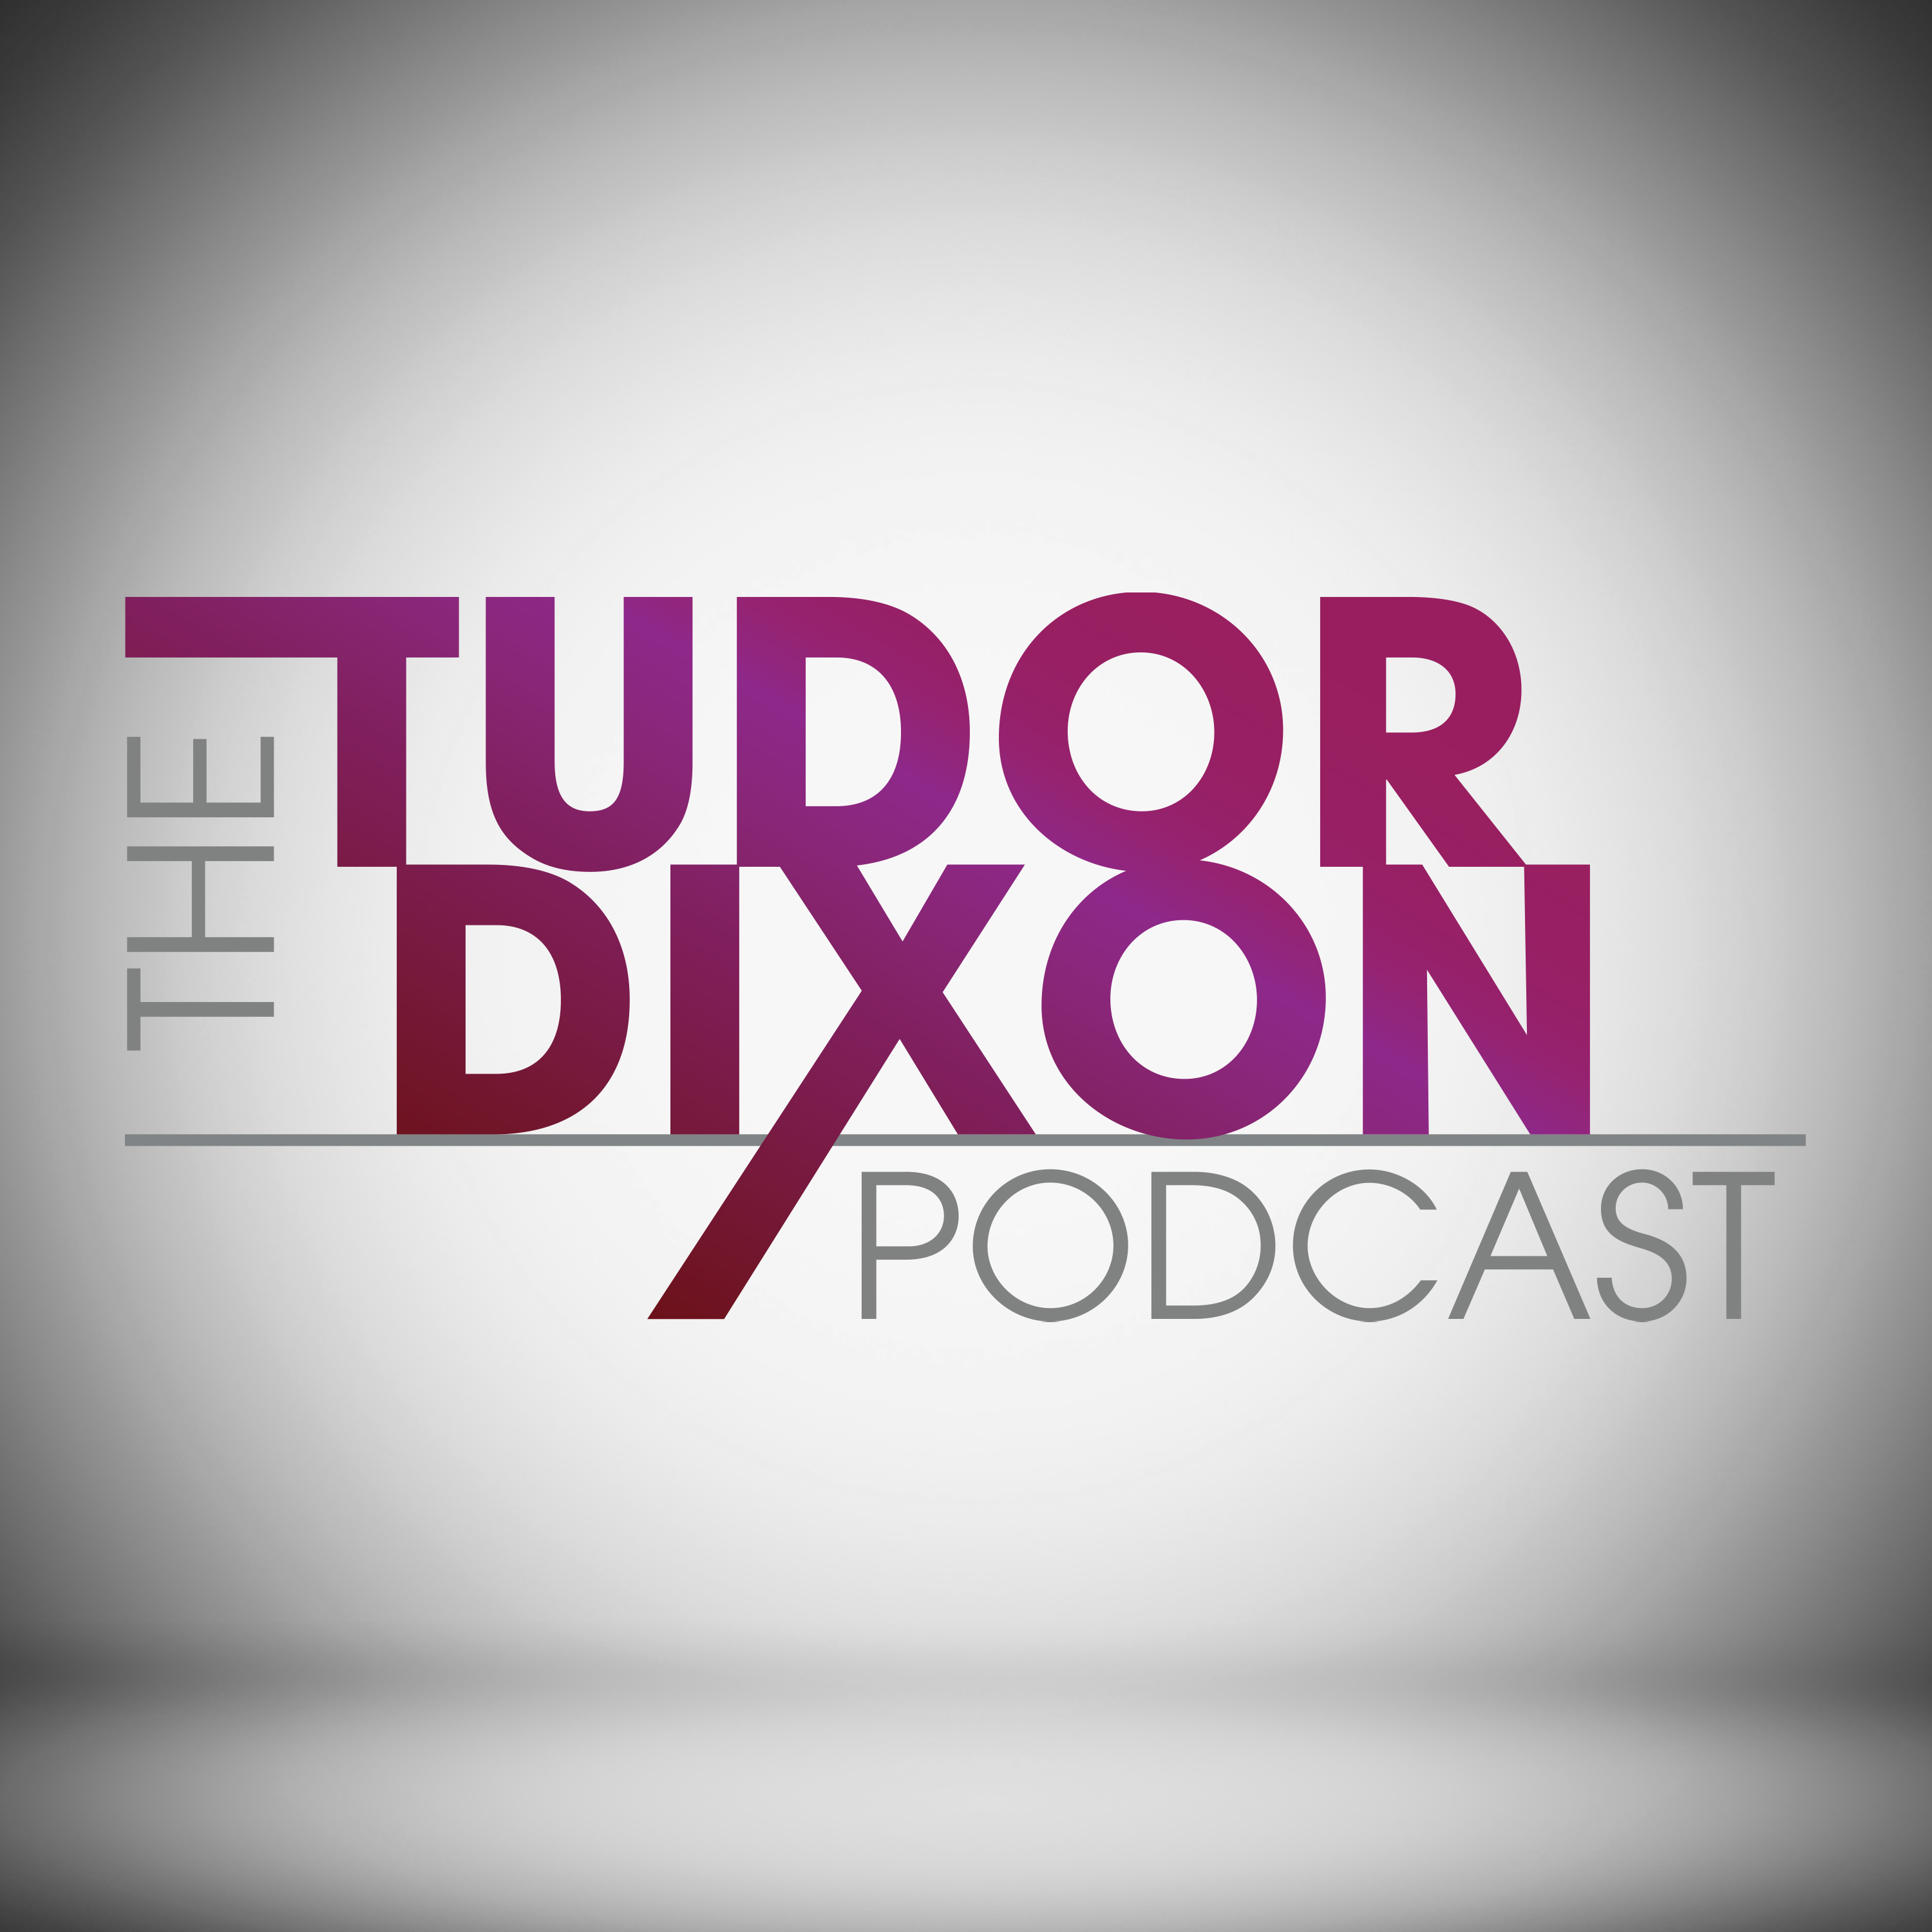 The Tudor Dixon Podcast: The Shocking Details of Baby Trafficking with Tamuna Museridze